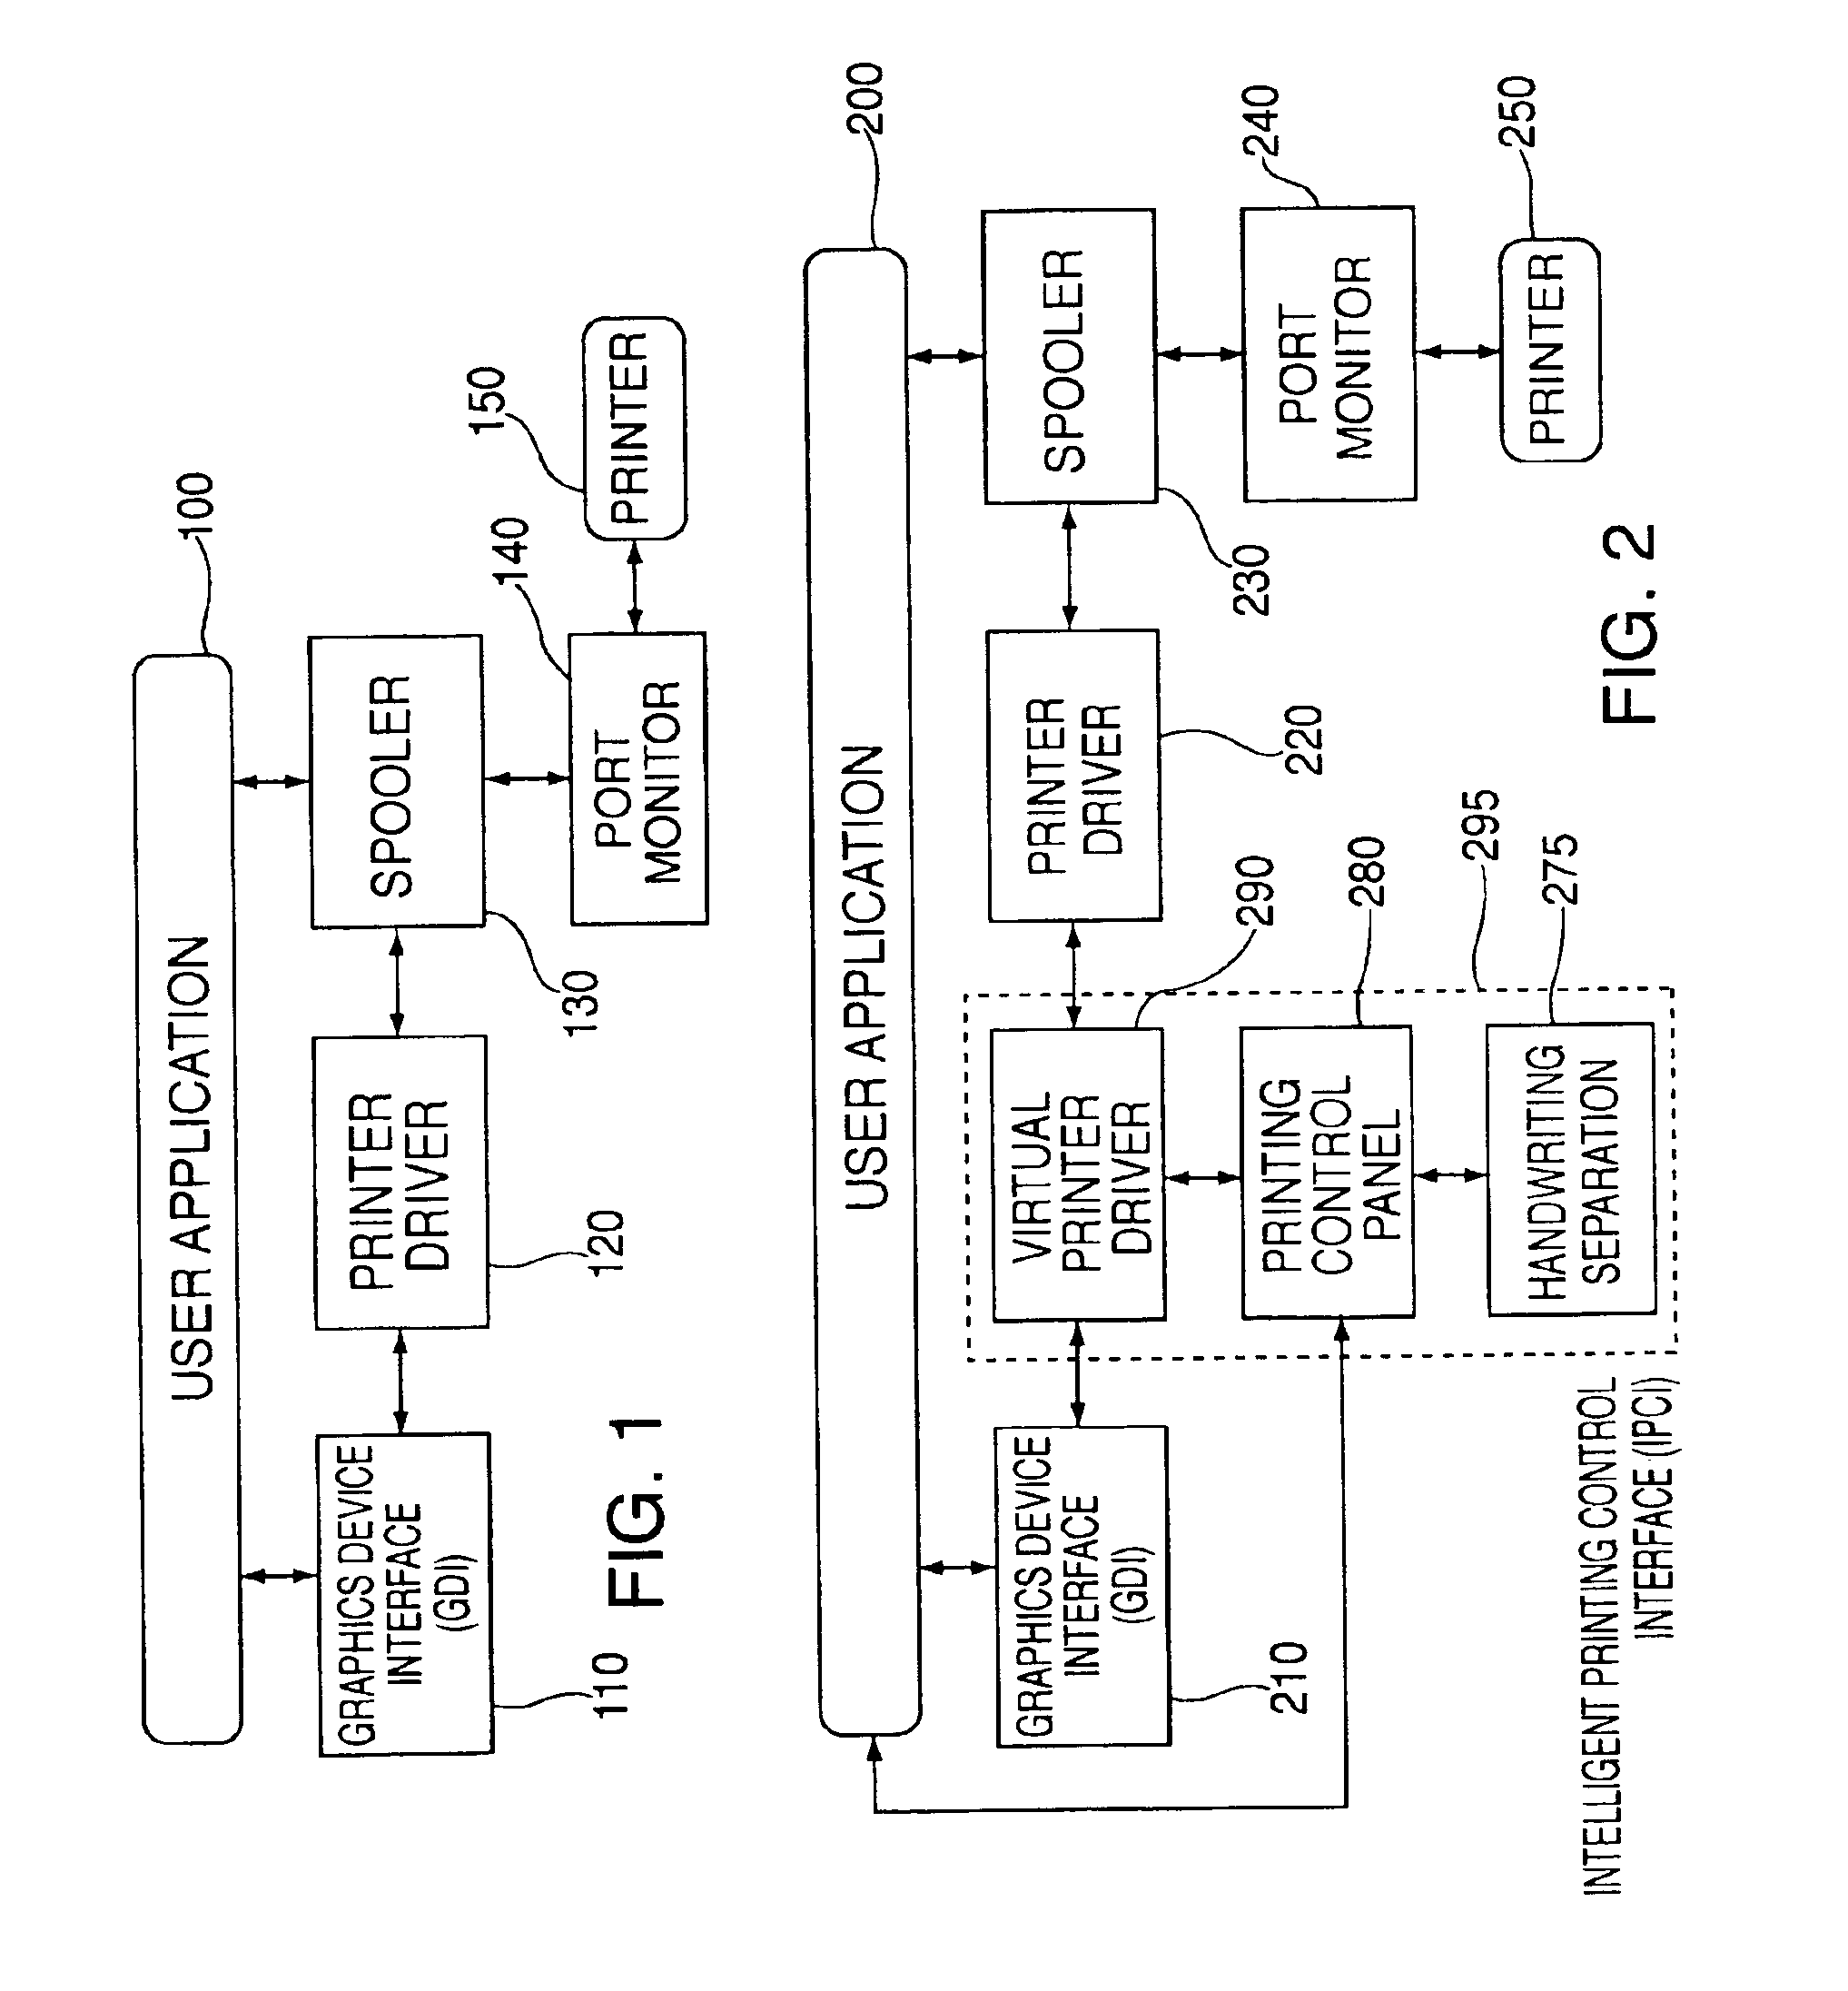 Printing control interface system and method with handwriting discrimination capability